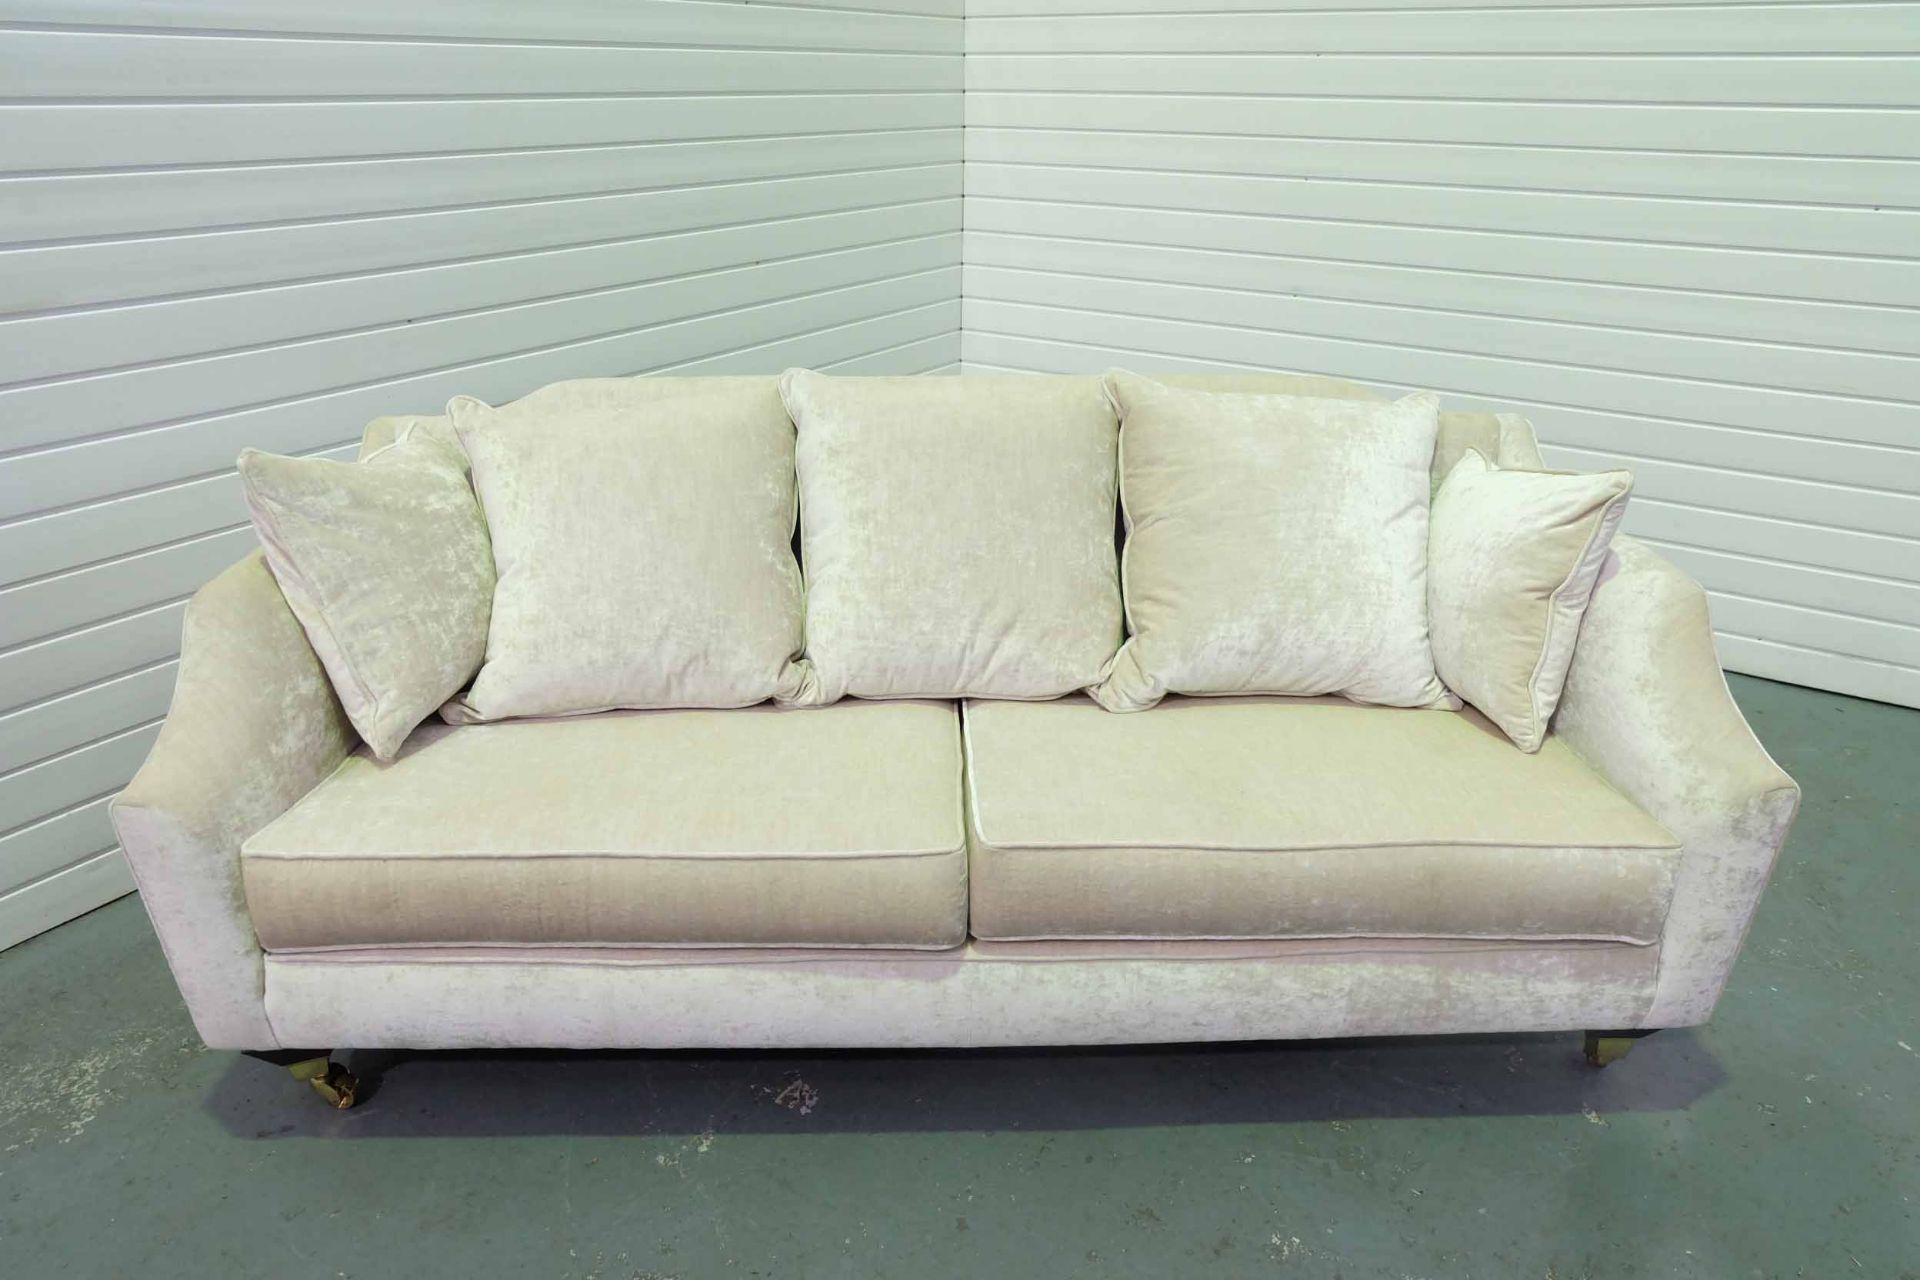 Steed Upholstery 'Hockley' Range Fully Handmade 2 Seater Sofa. With Castor Wheels to the Front of